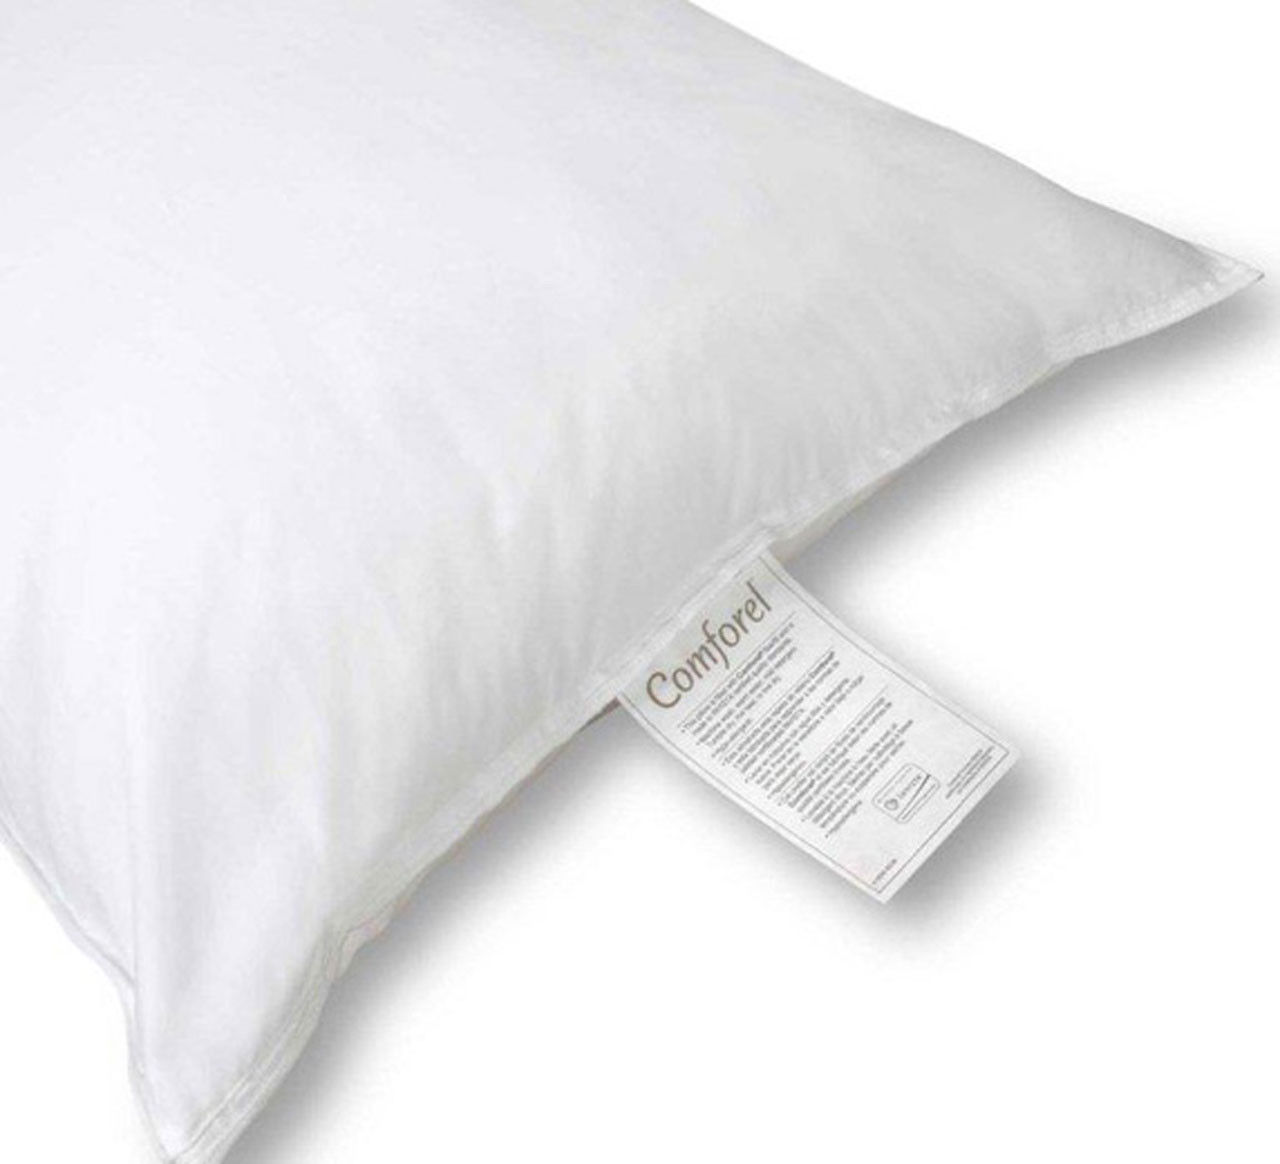 What benefits do comforel pillows offer?